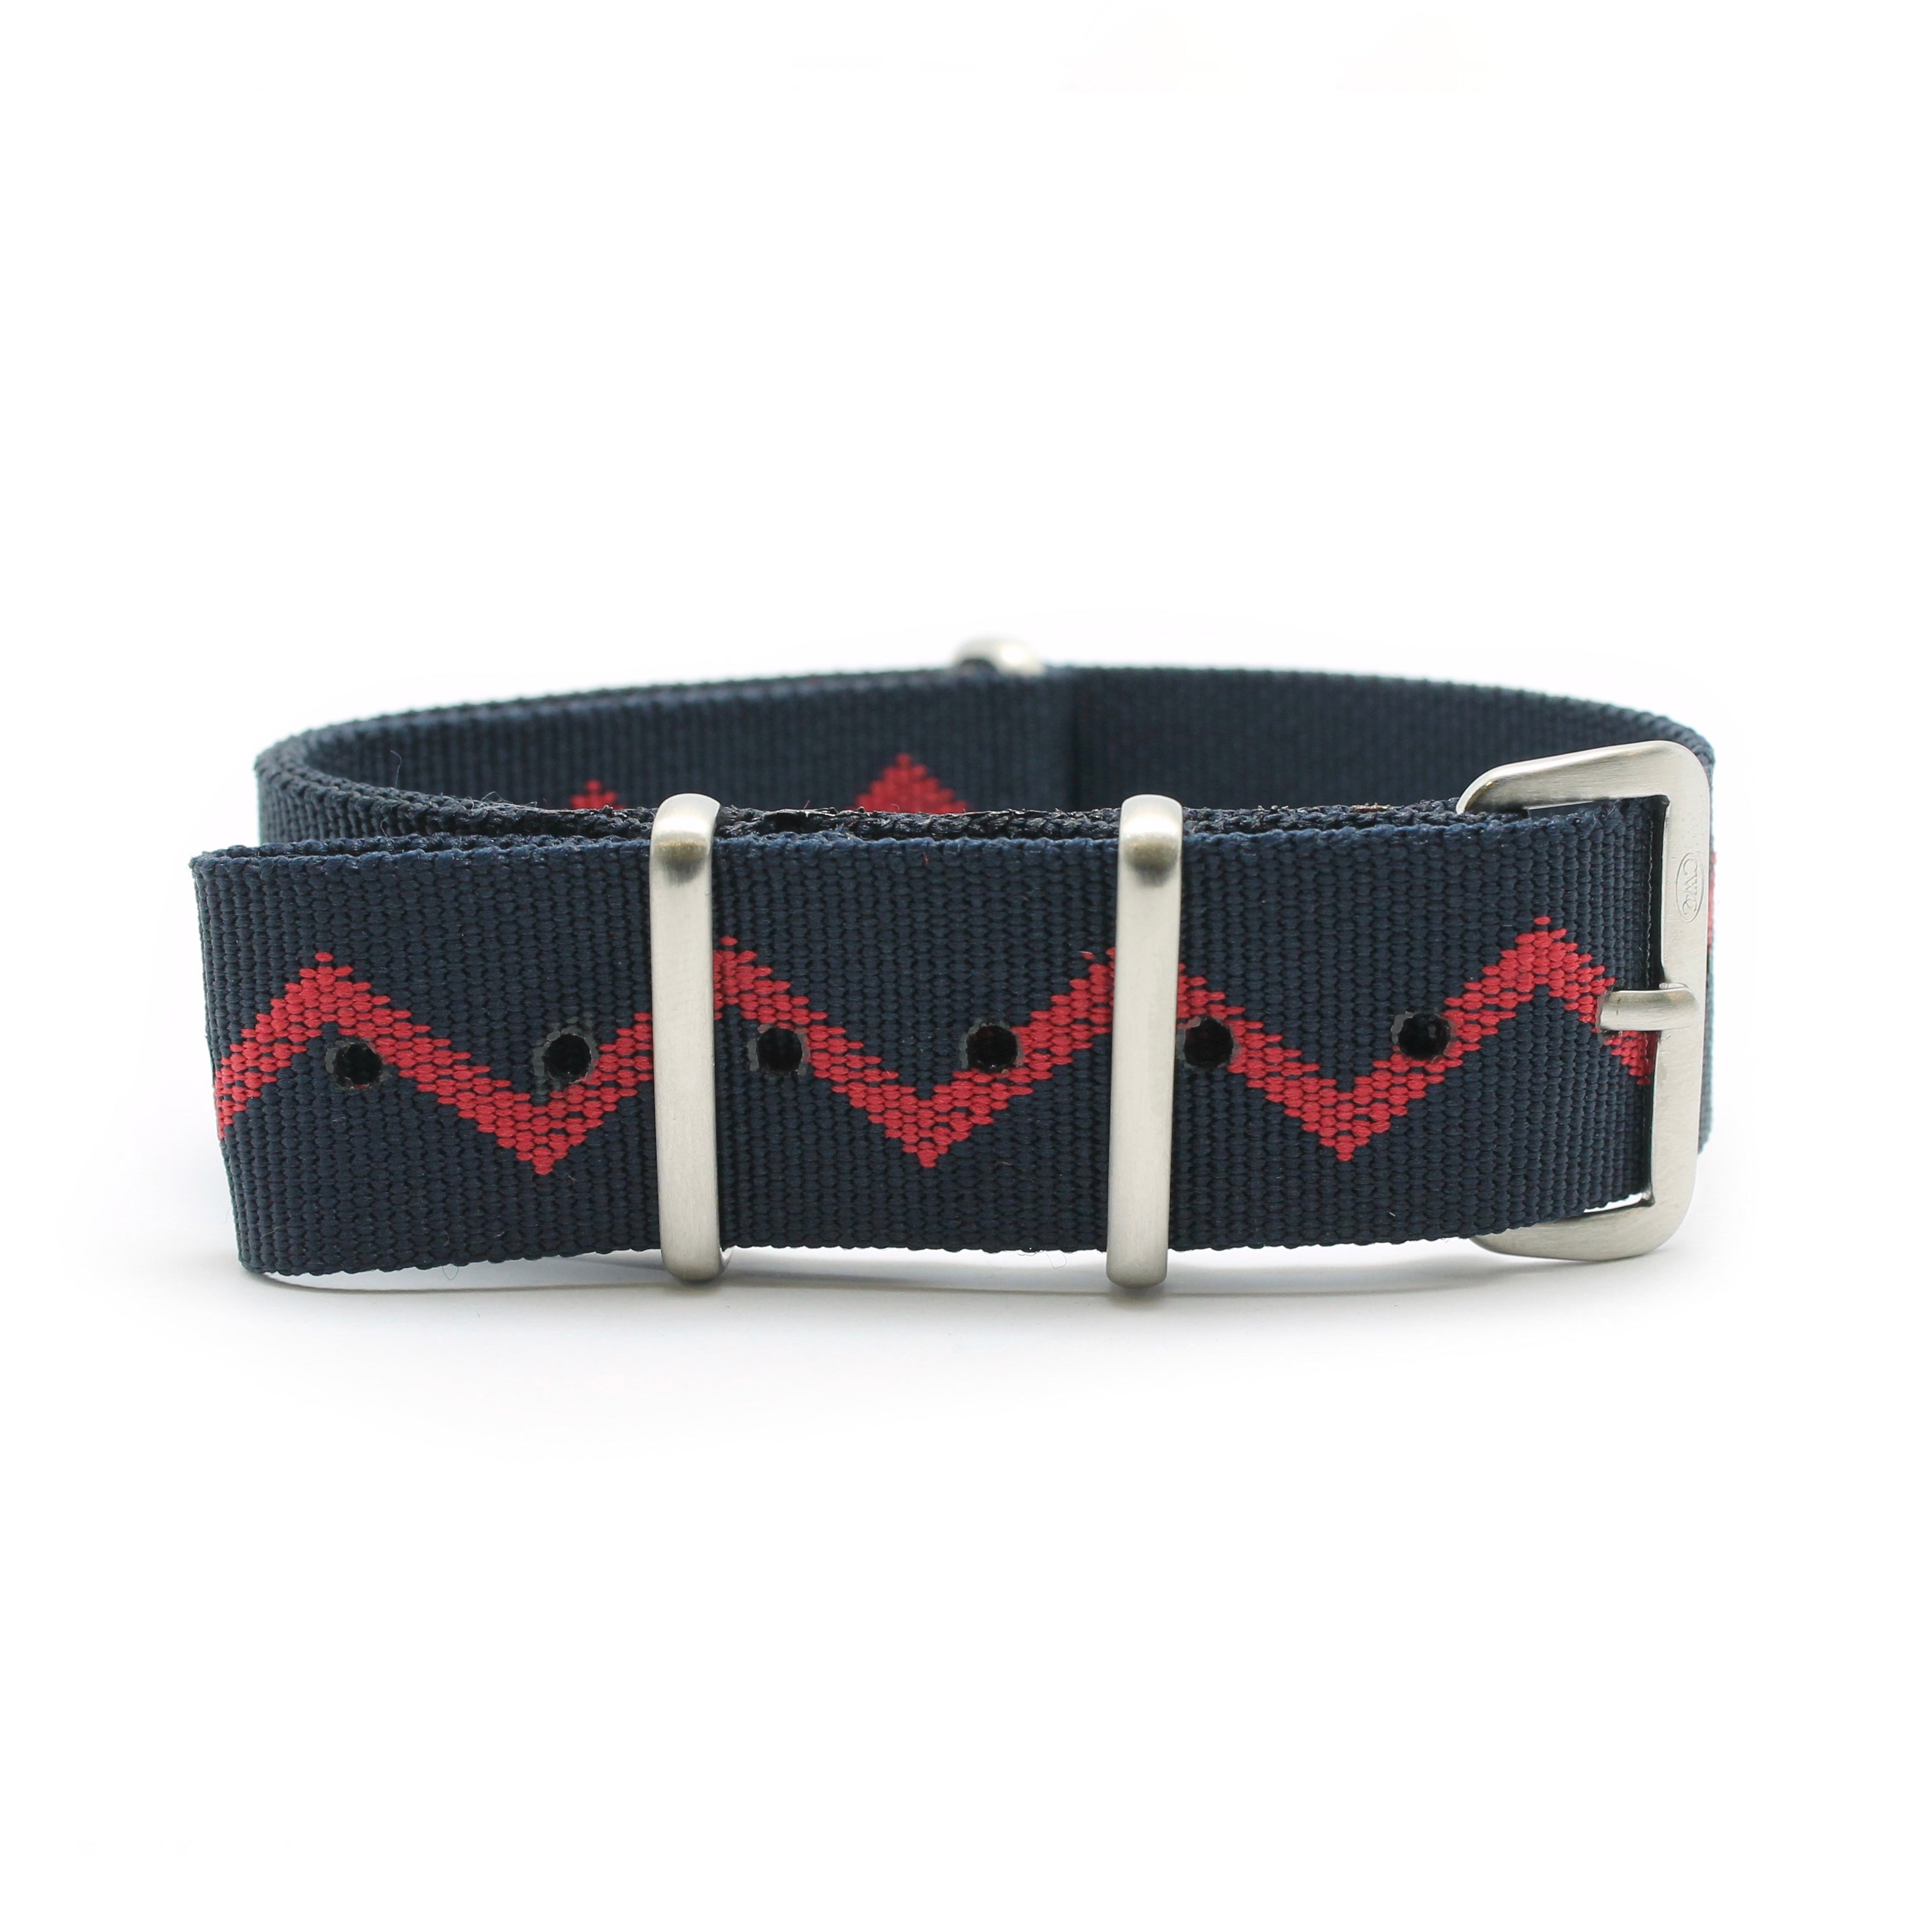 CWC NATO ZIGZAG STRAP - NAVY WITH RED